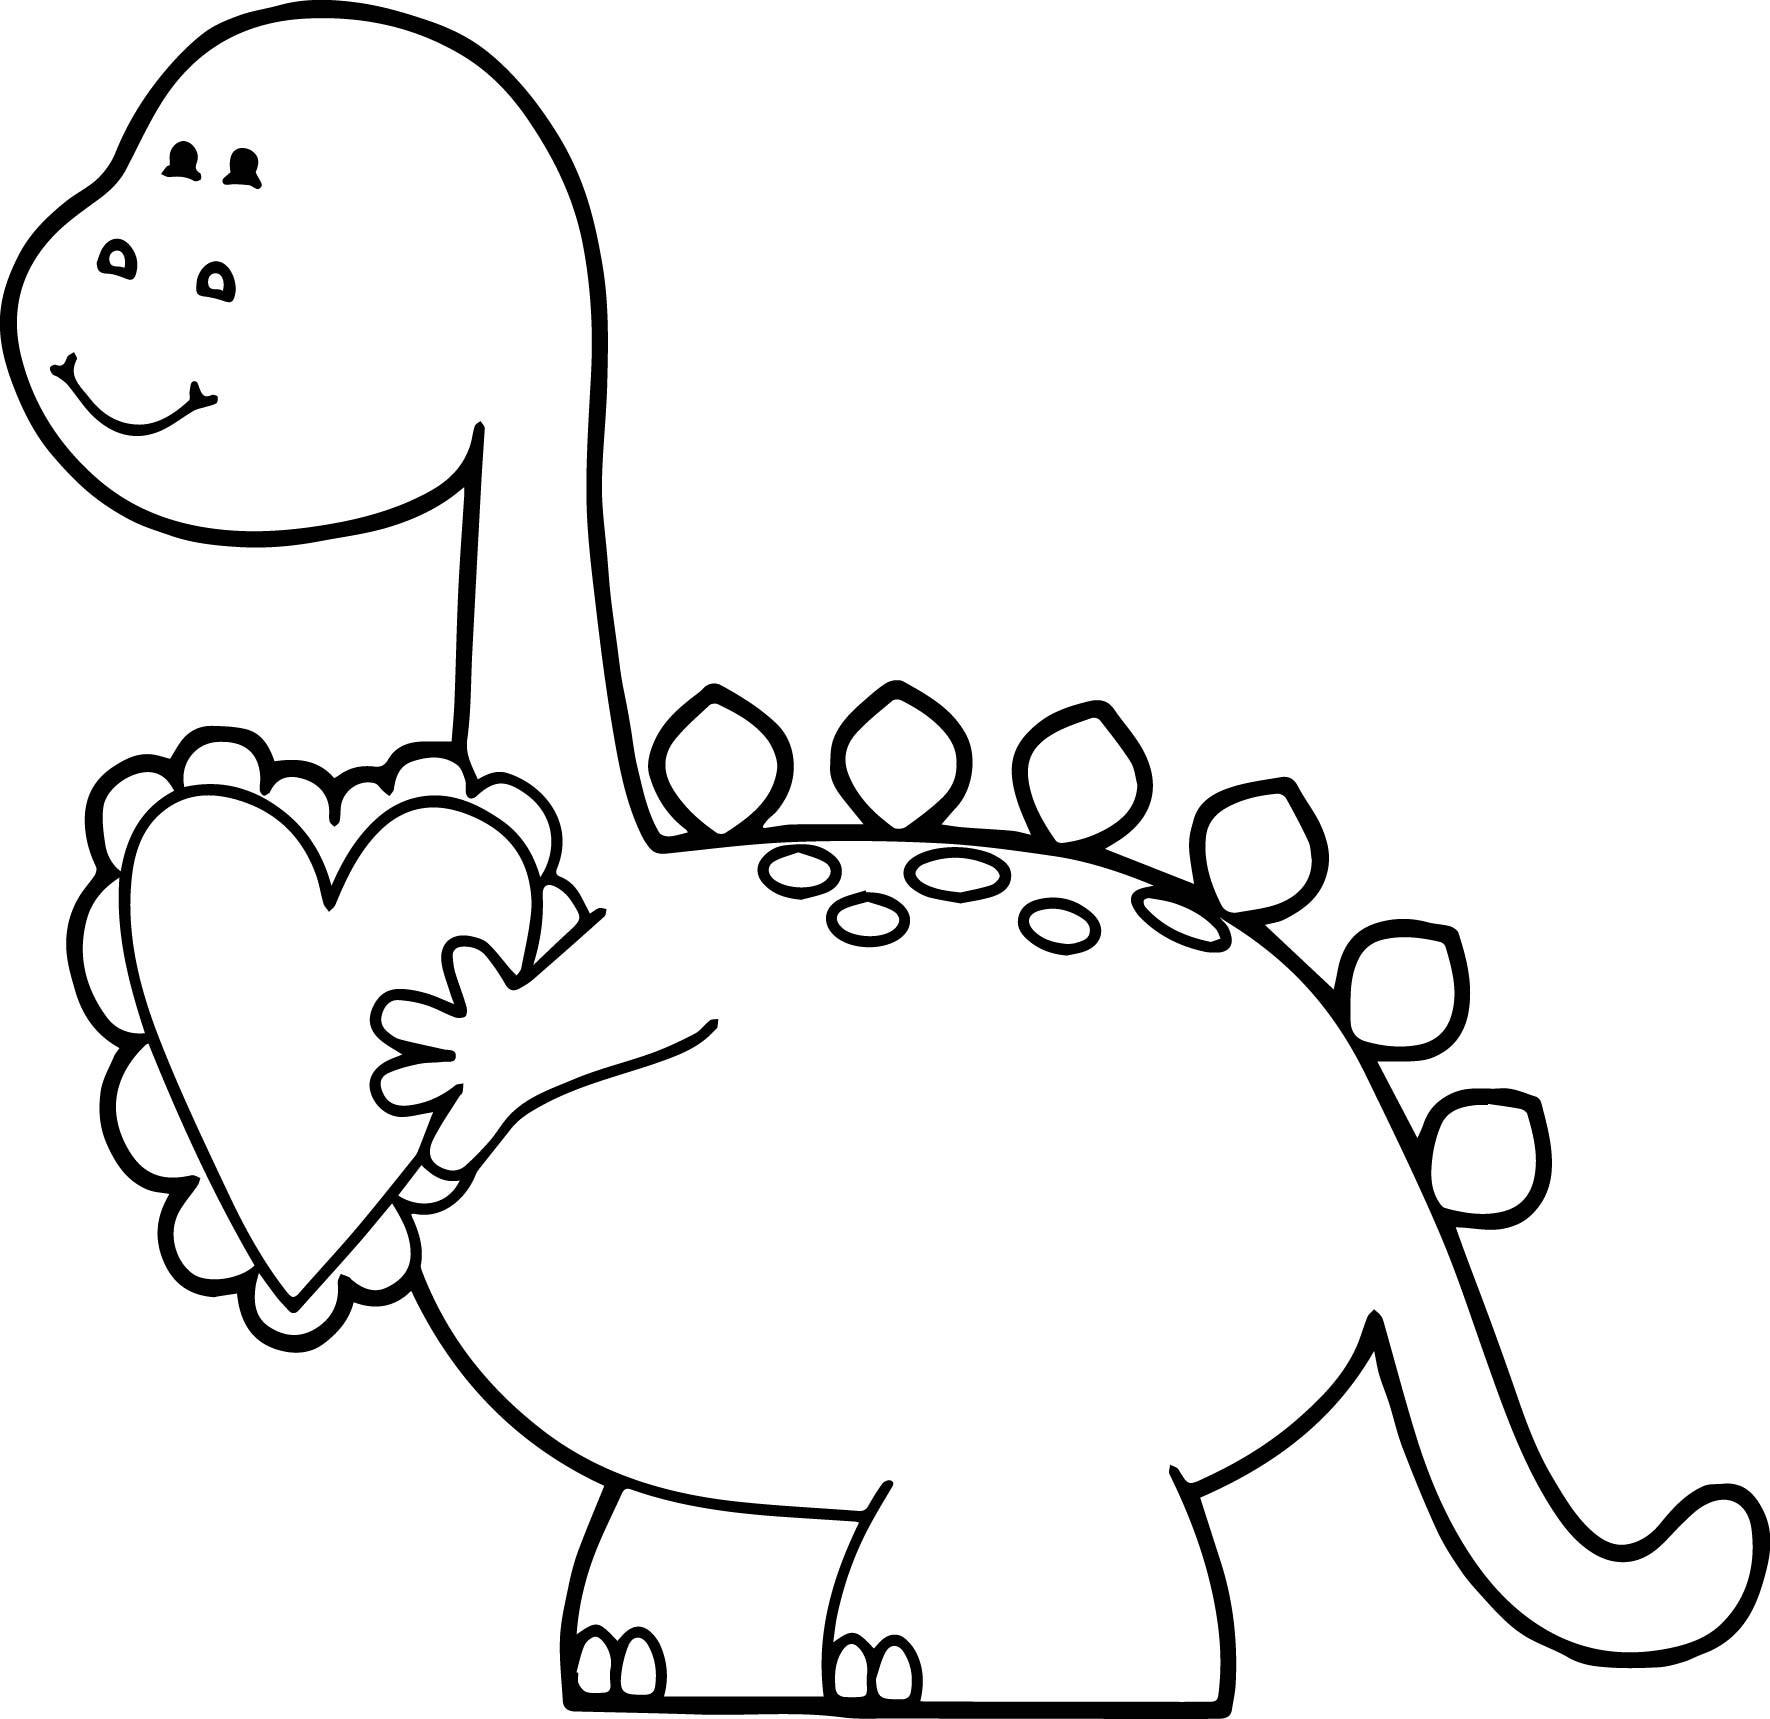 Dinosaur Valentine Coloring Pages at Free printable